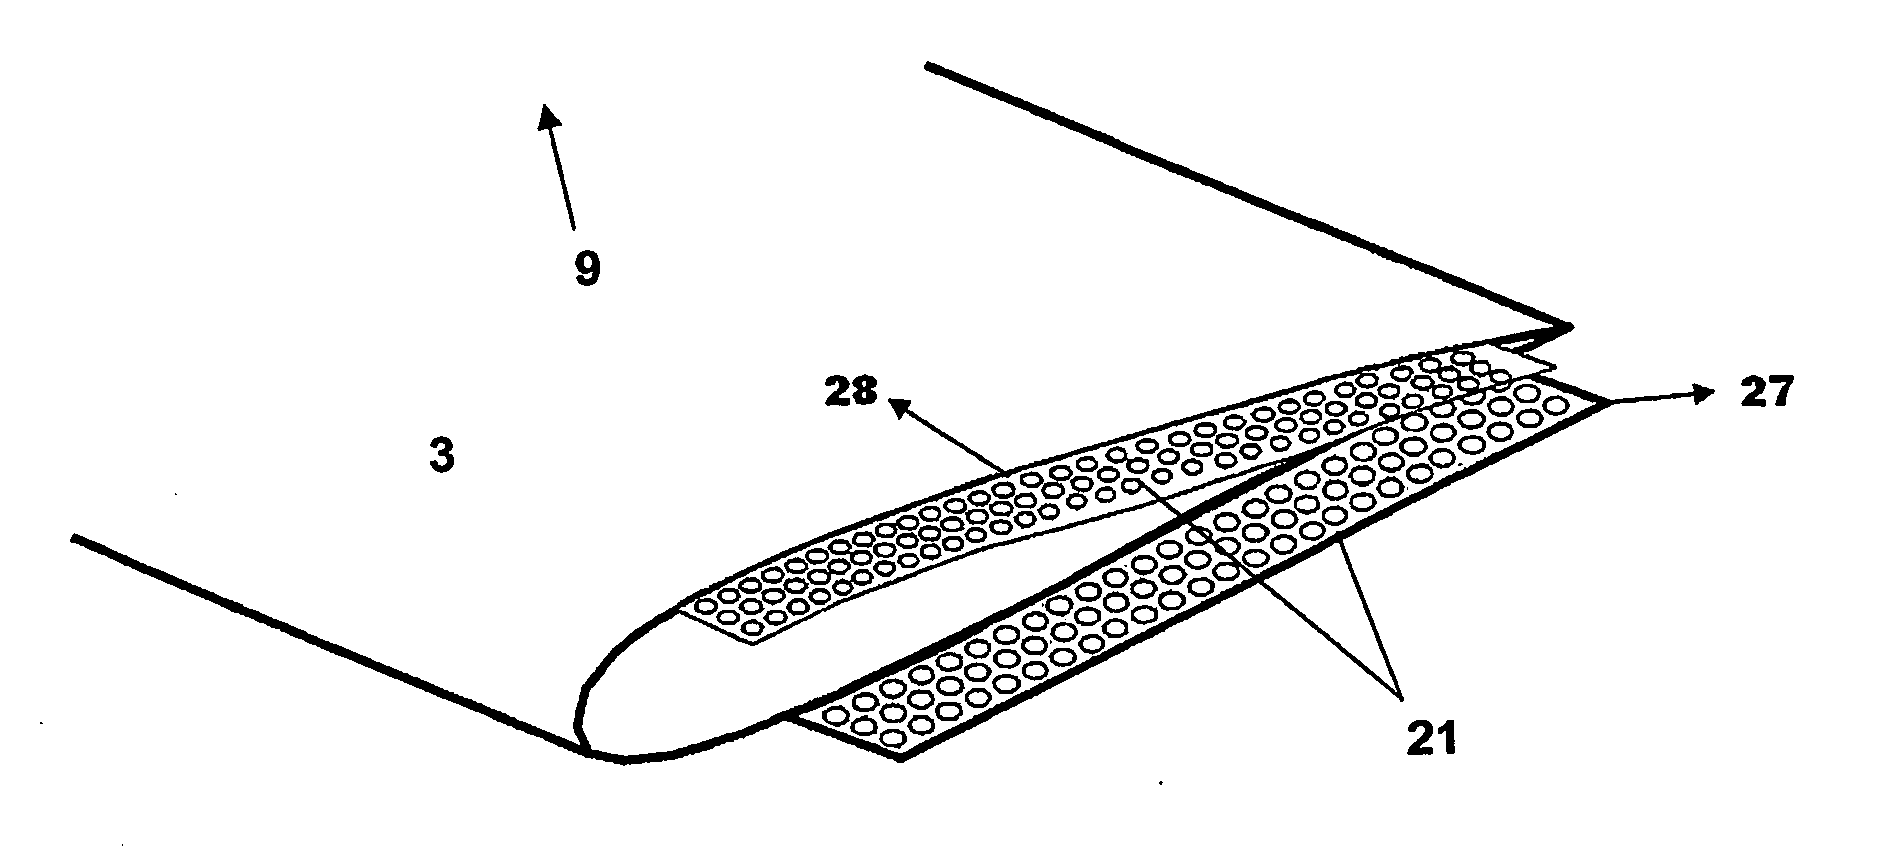 Aerodynamic seal for reduction of noise generated on aircraft control surfaces